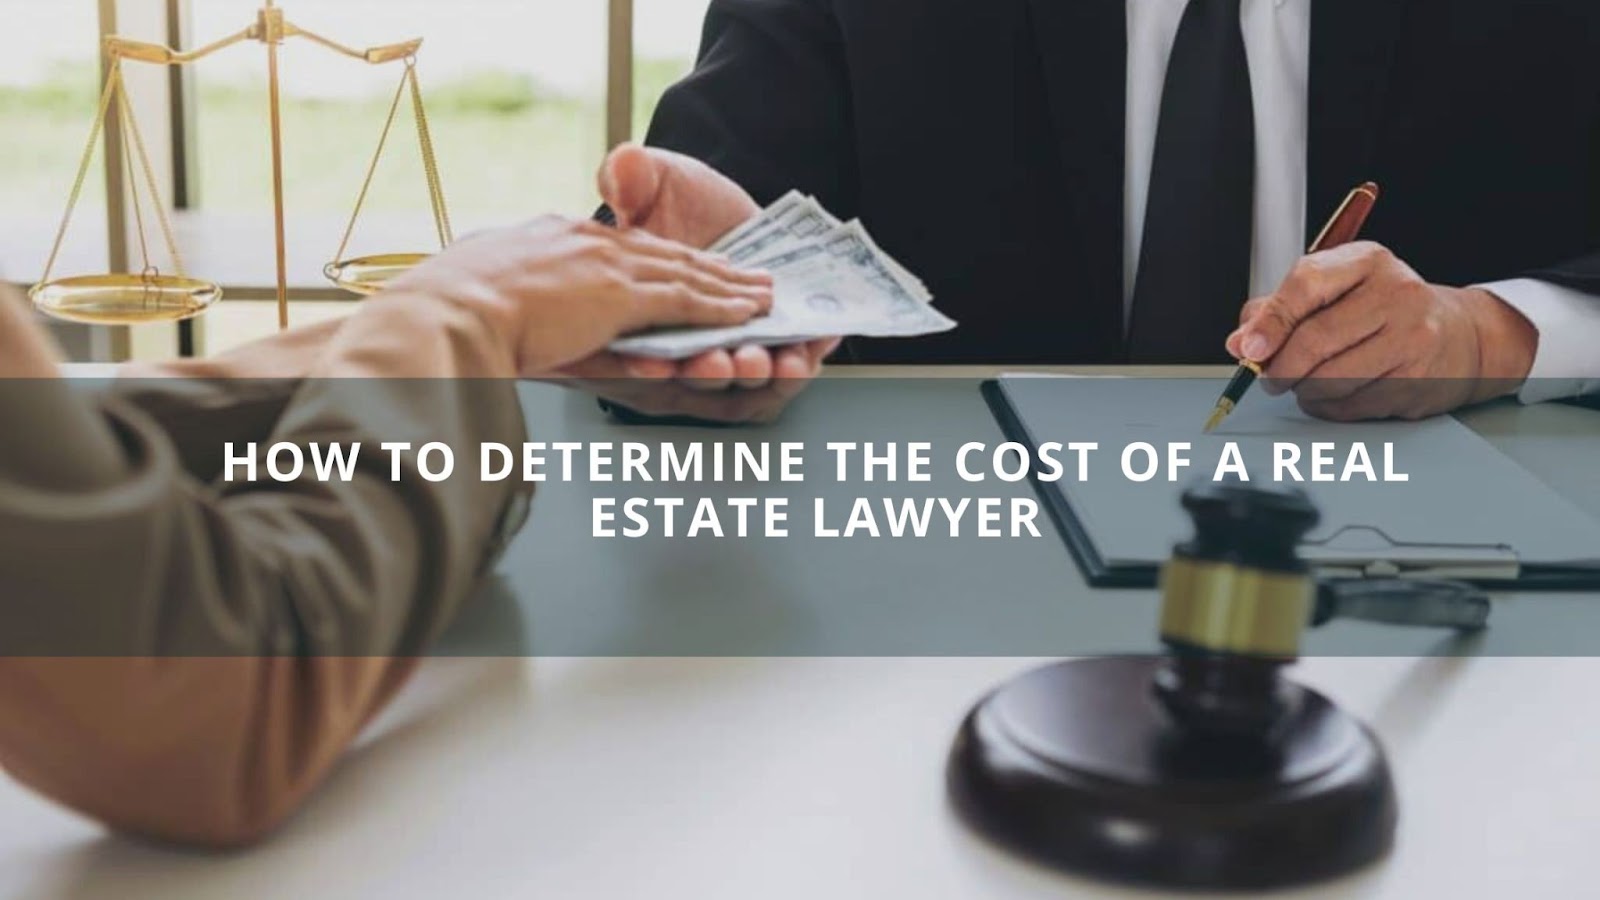 How to Determine the Cost of a Real Estate Lawyer?